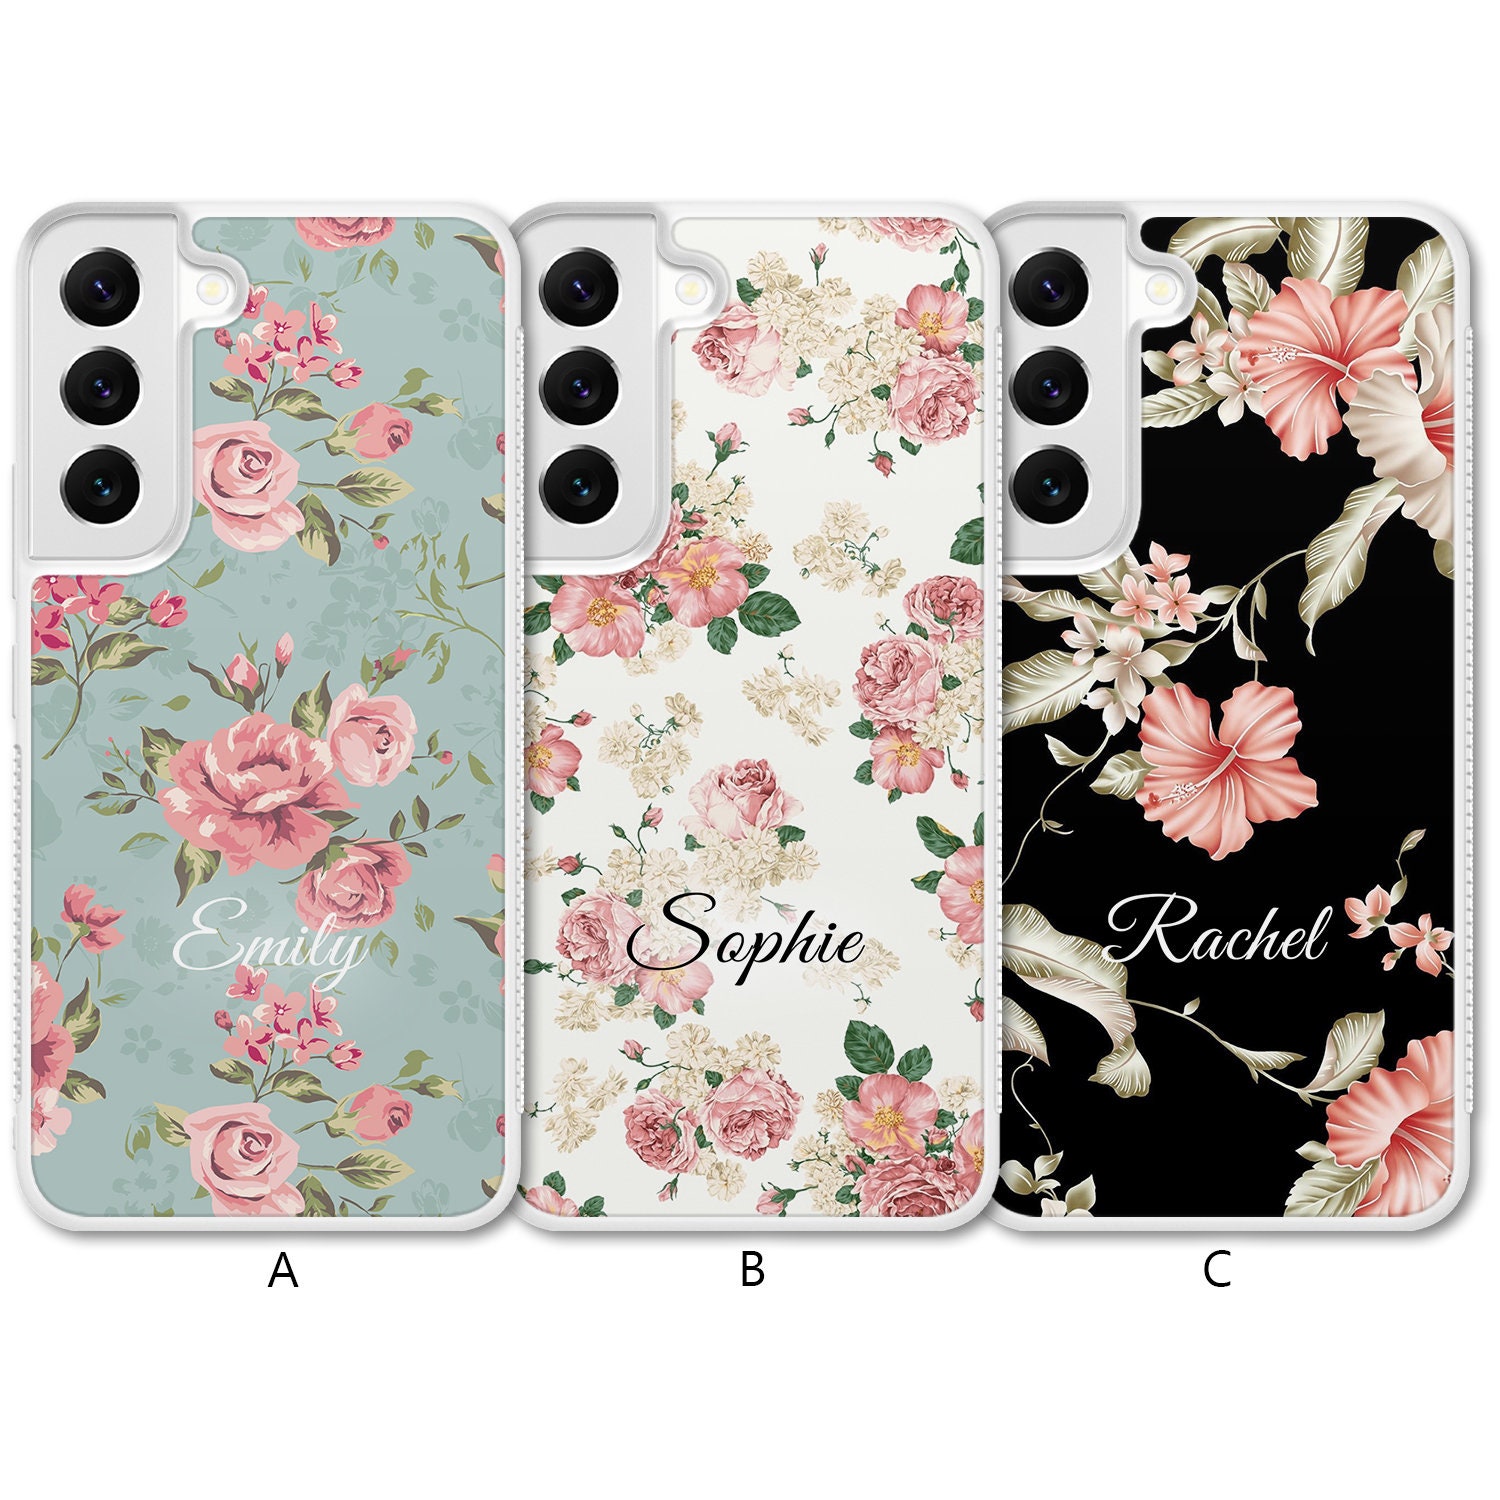 Luxury Phone Cases Samsung Galaxy S22 Ultra - Luxury Flower Cover